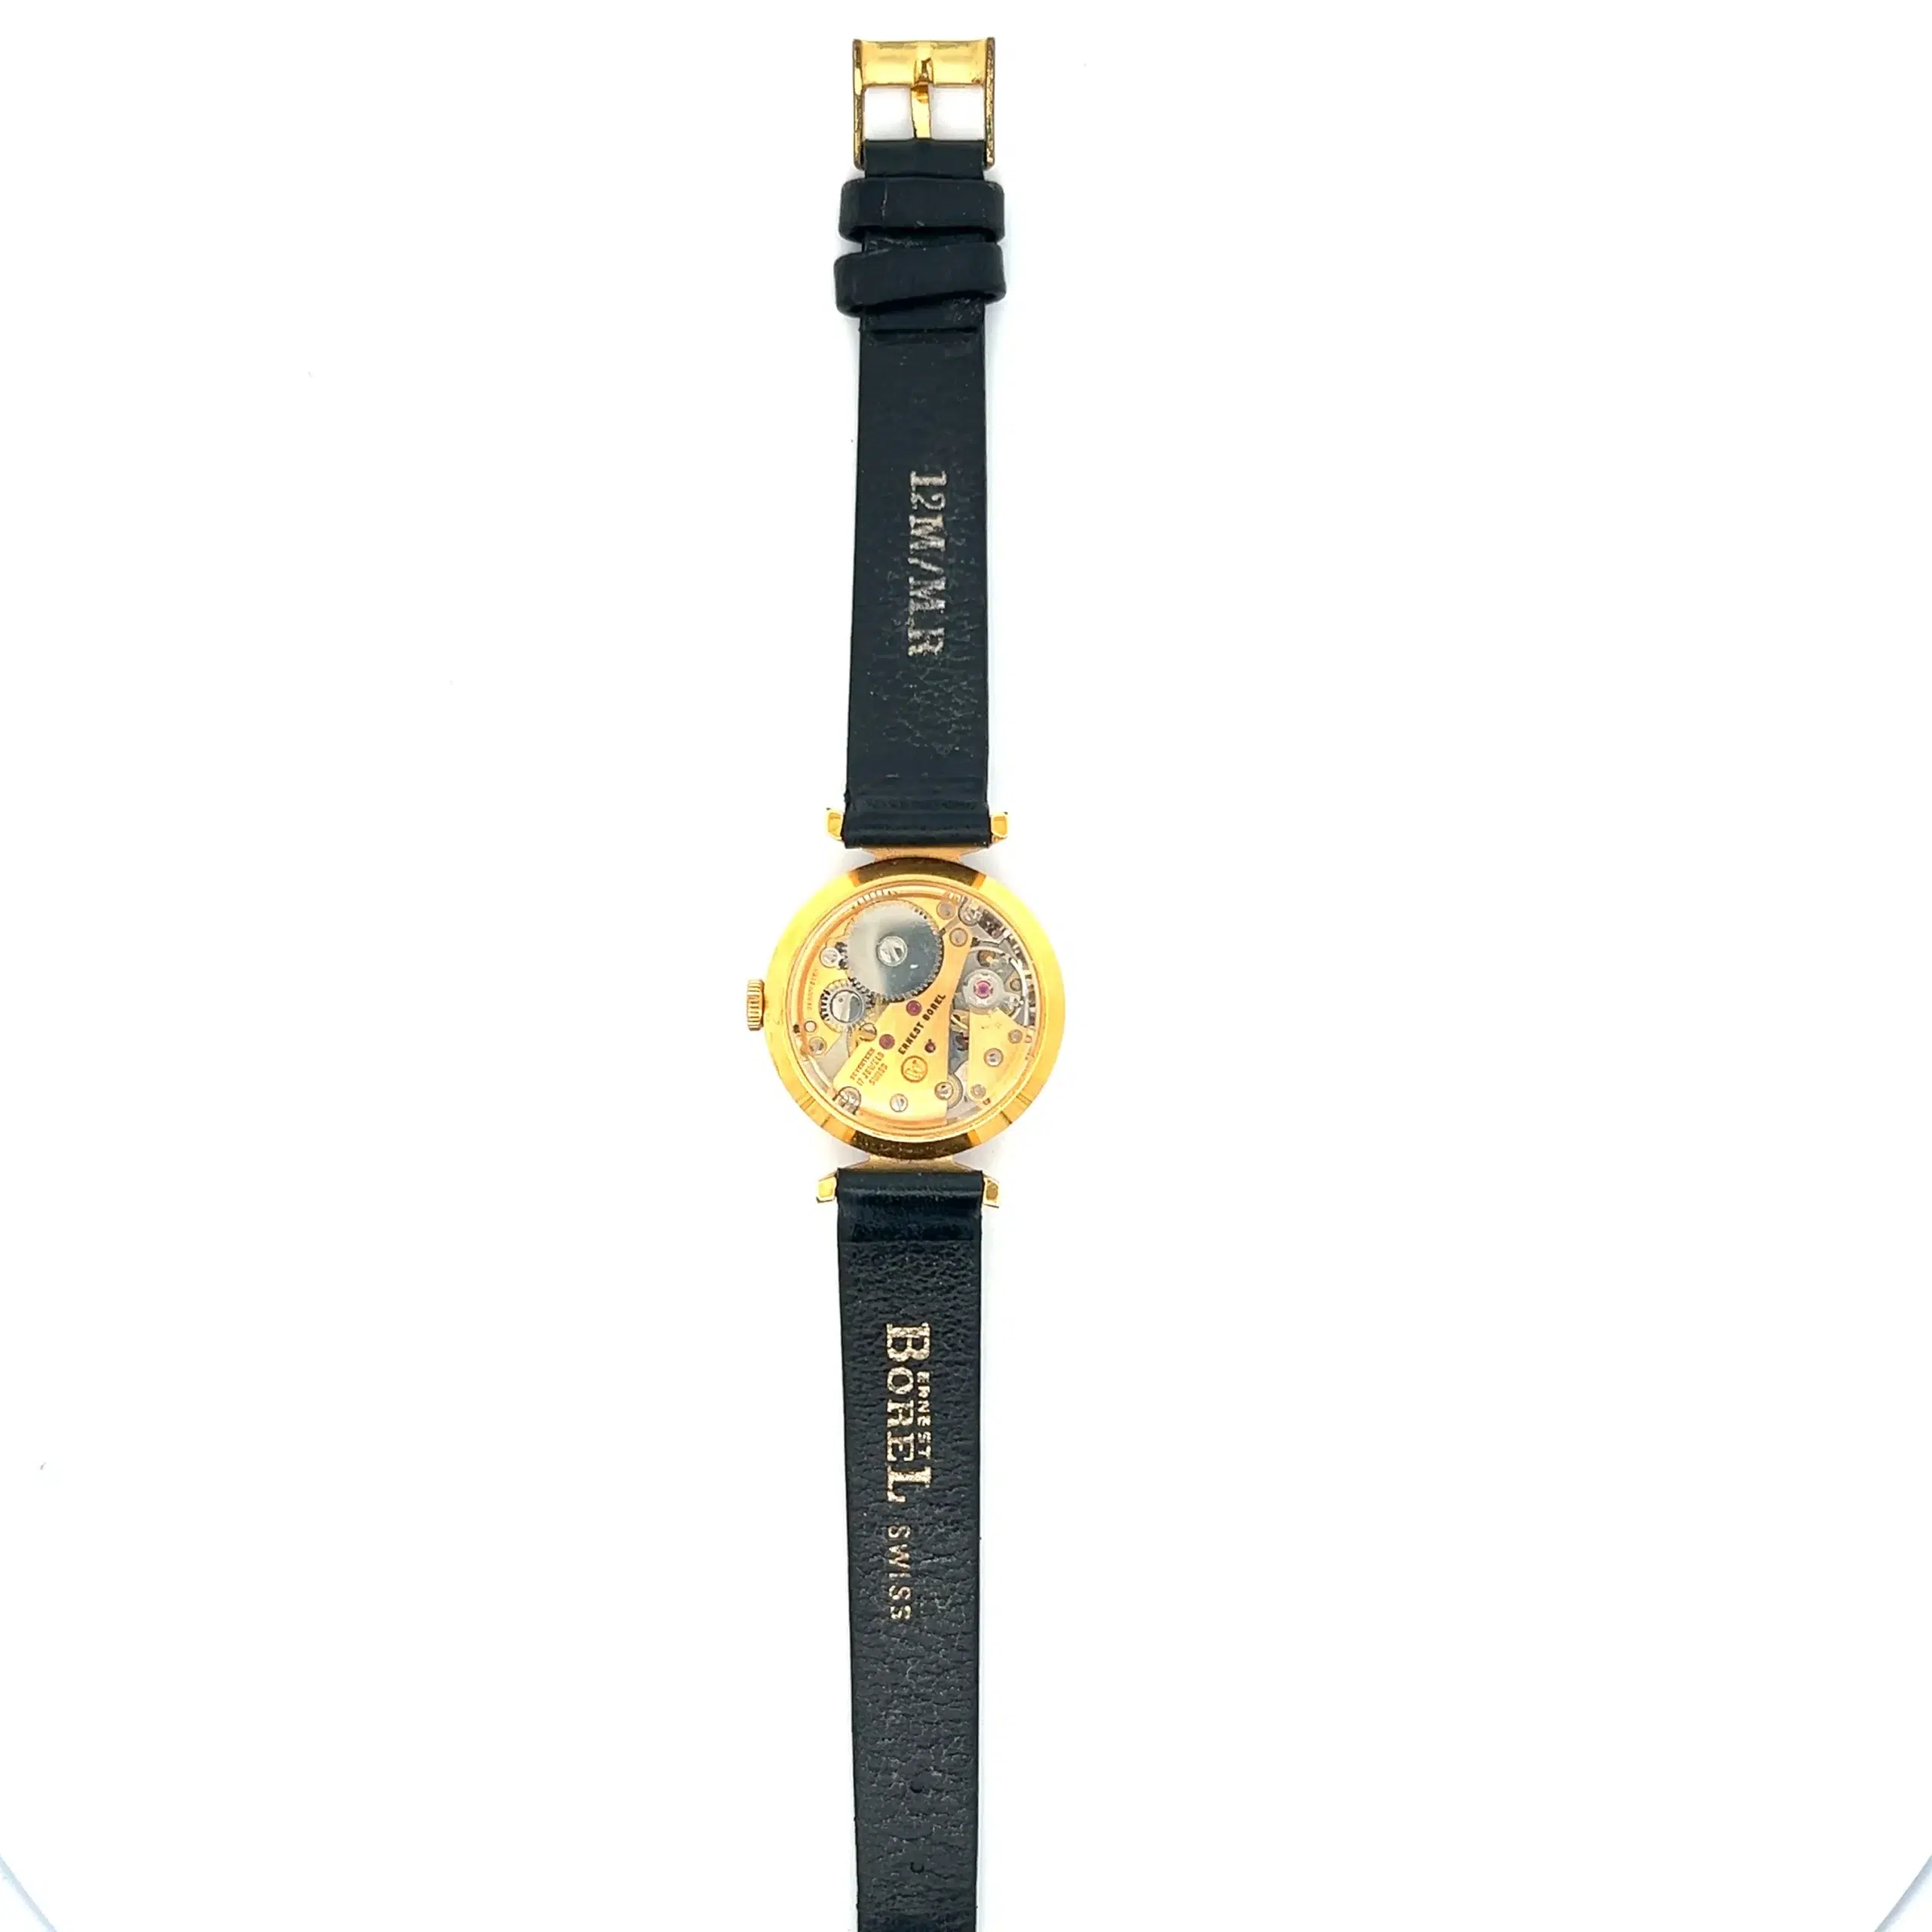 Vintage Estate Ernest Borel Kaleidoscope Watch with Black and White Straps in Yellow Gold-Filled